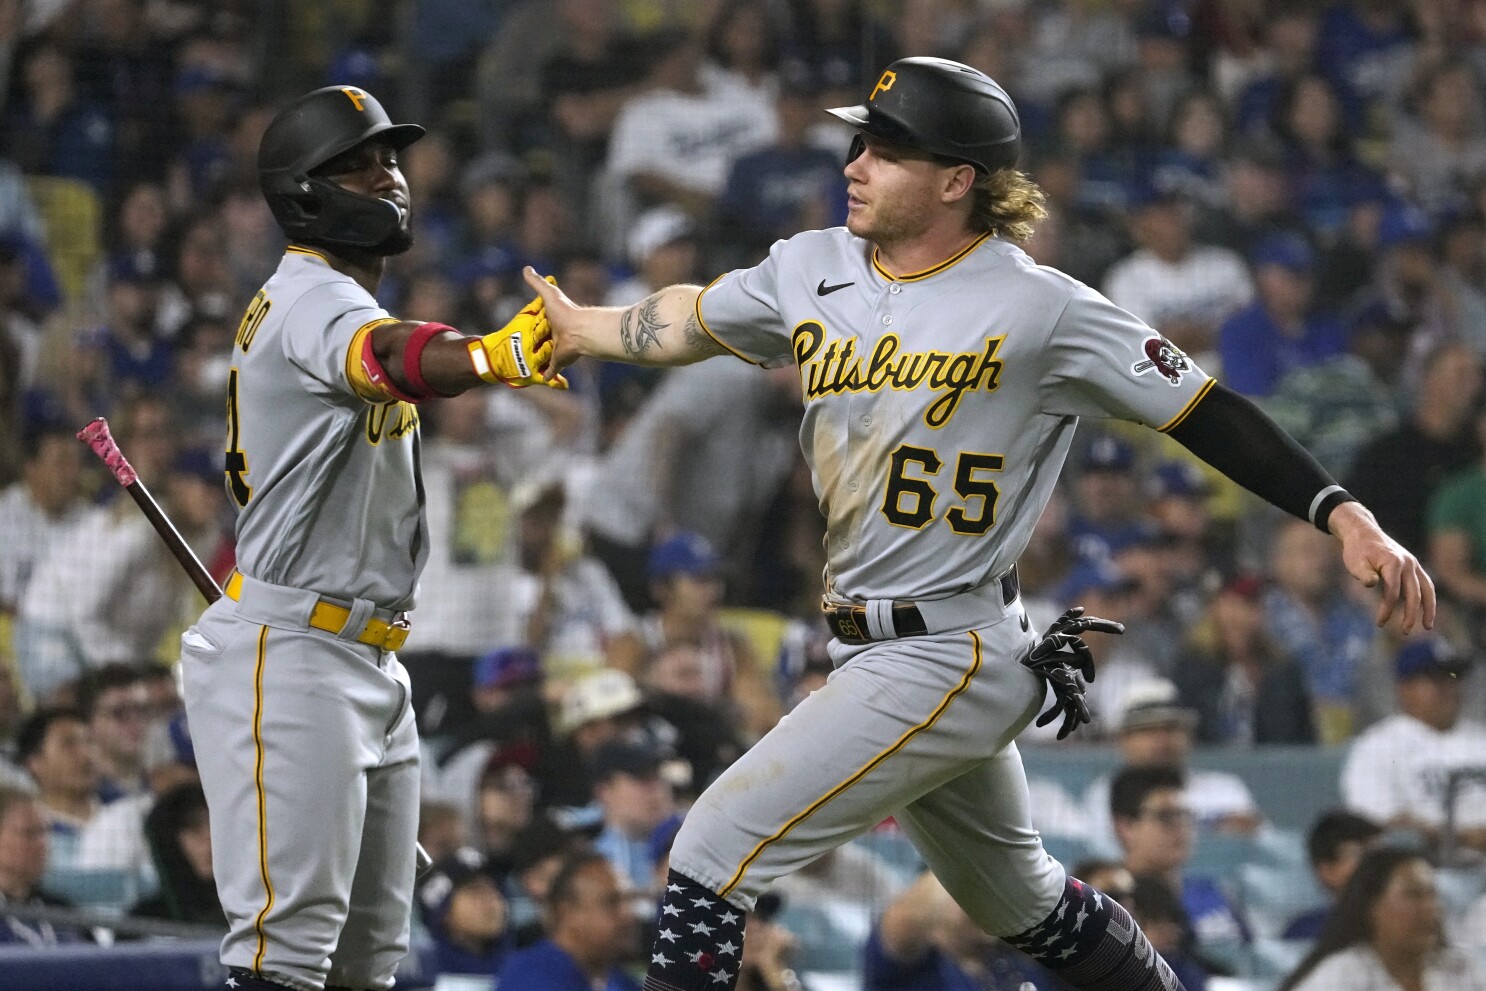 Palacios delivers a clutch double in the 9th as the Pirates rally past the  Dodgers 9-7